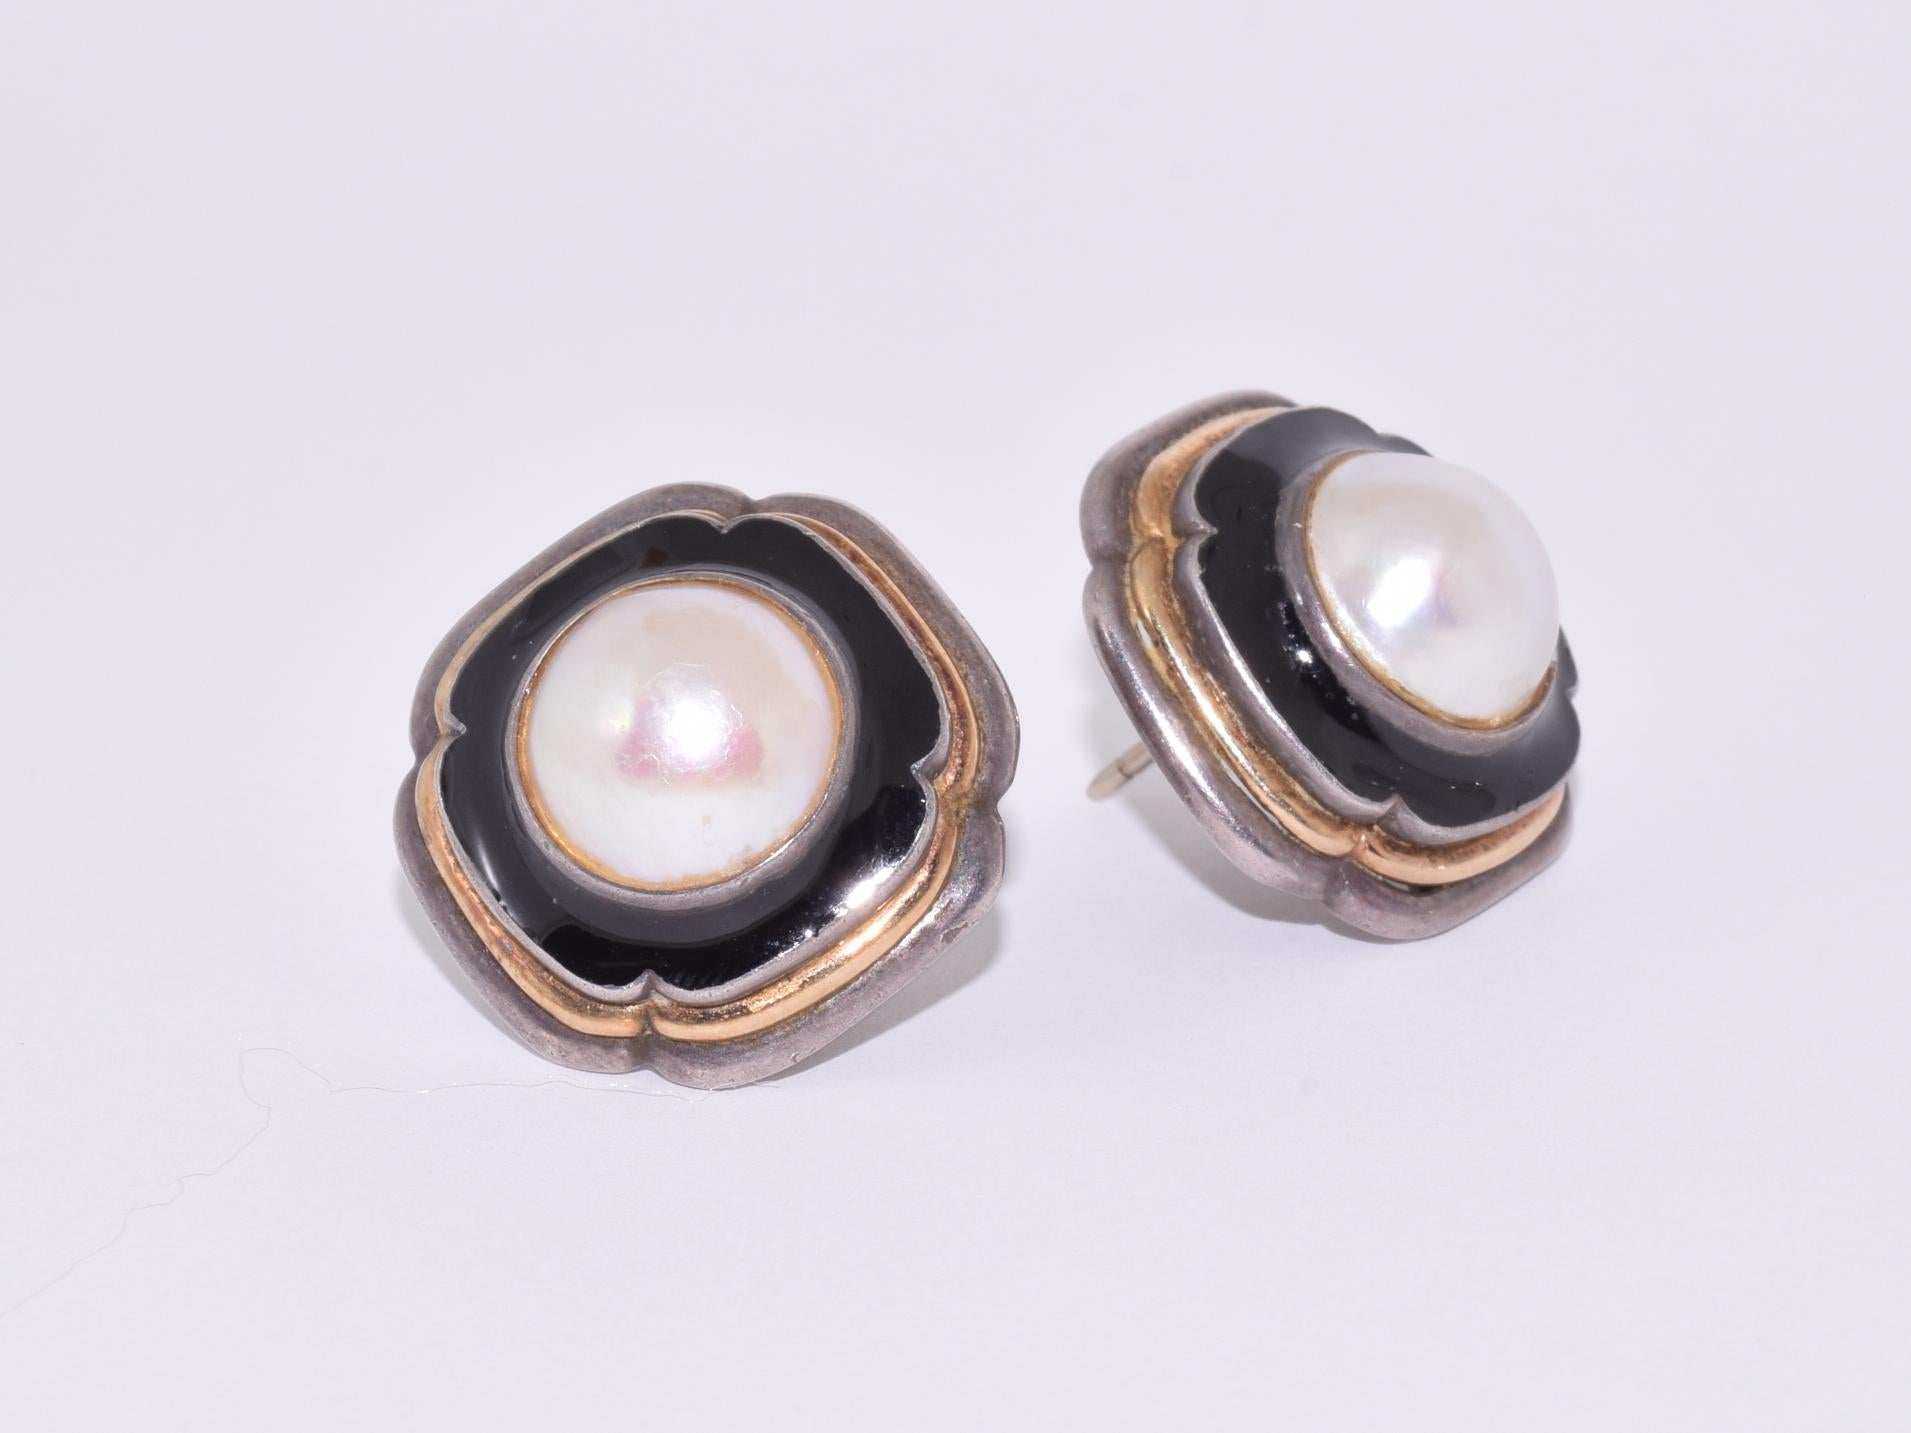 Retro Cartier Silver, Black Enamel and Mabe Pearl Earrings, circa 1940s